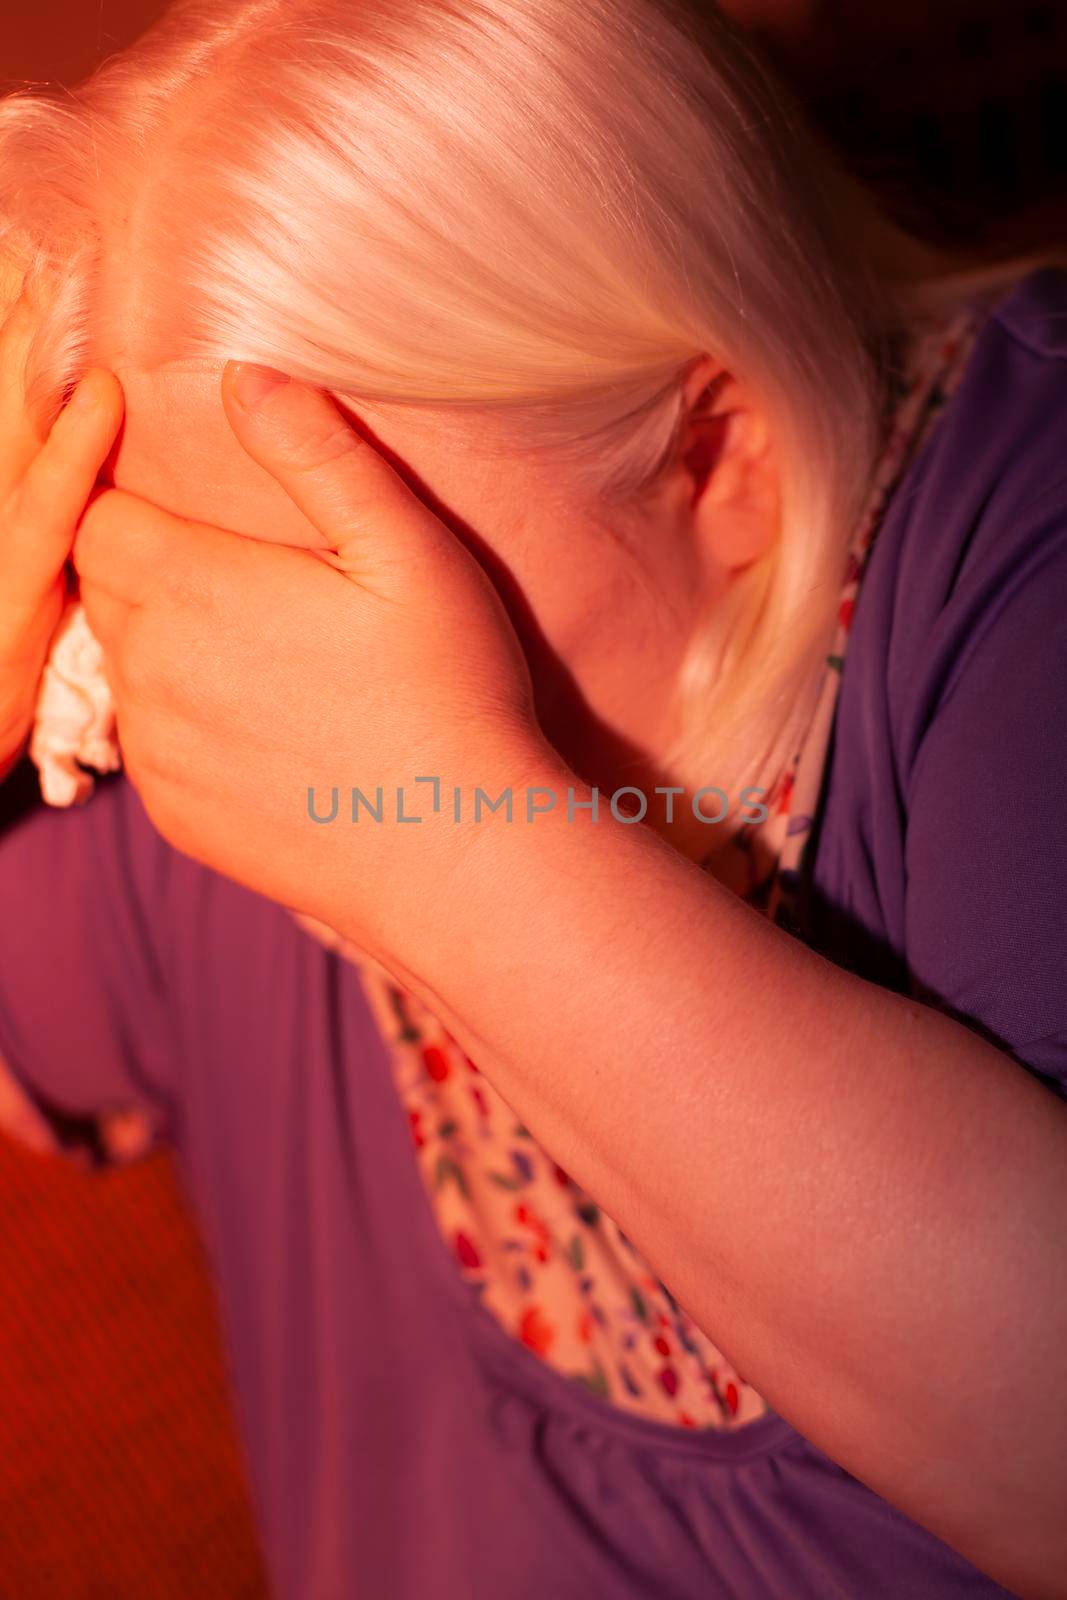 Upset woman with her hand over her eyes in a red tint